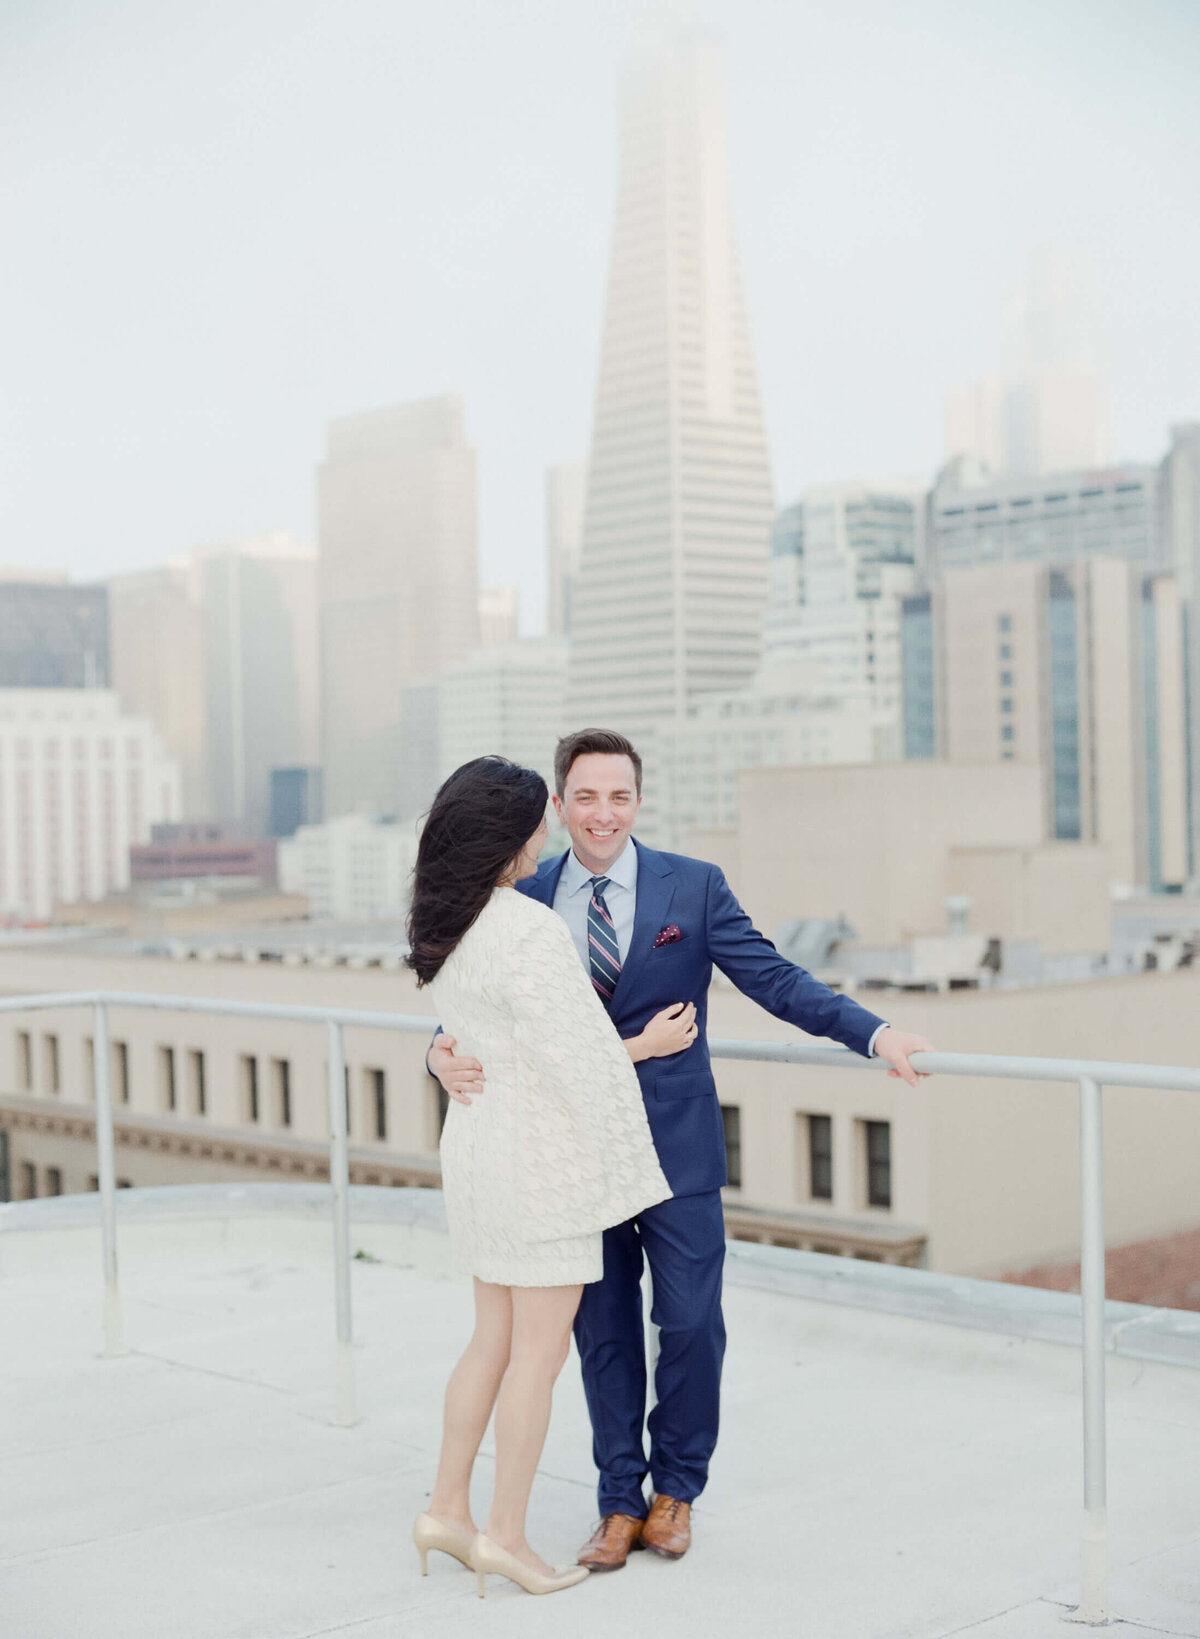 Elopement photography in San Francisco.